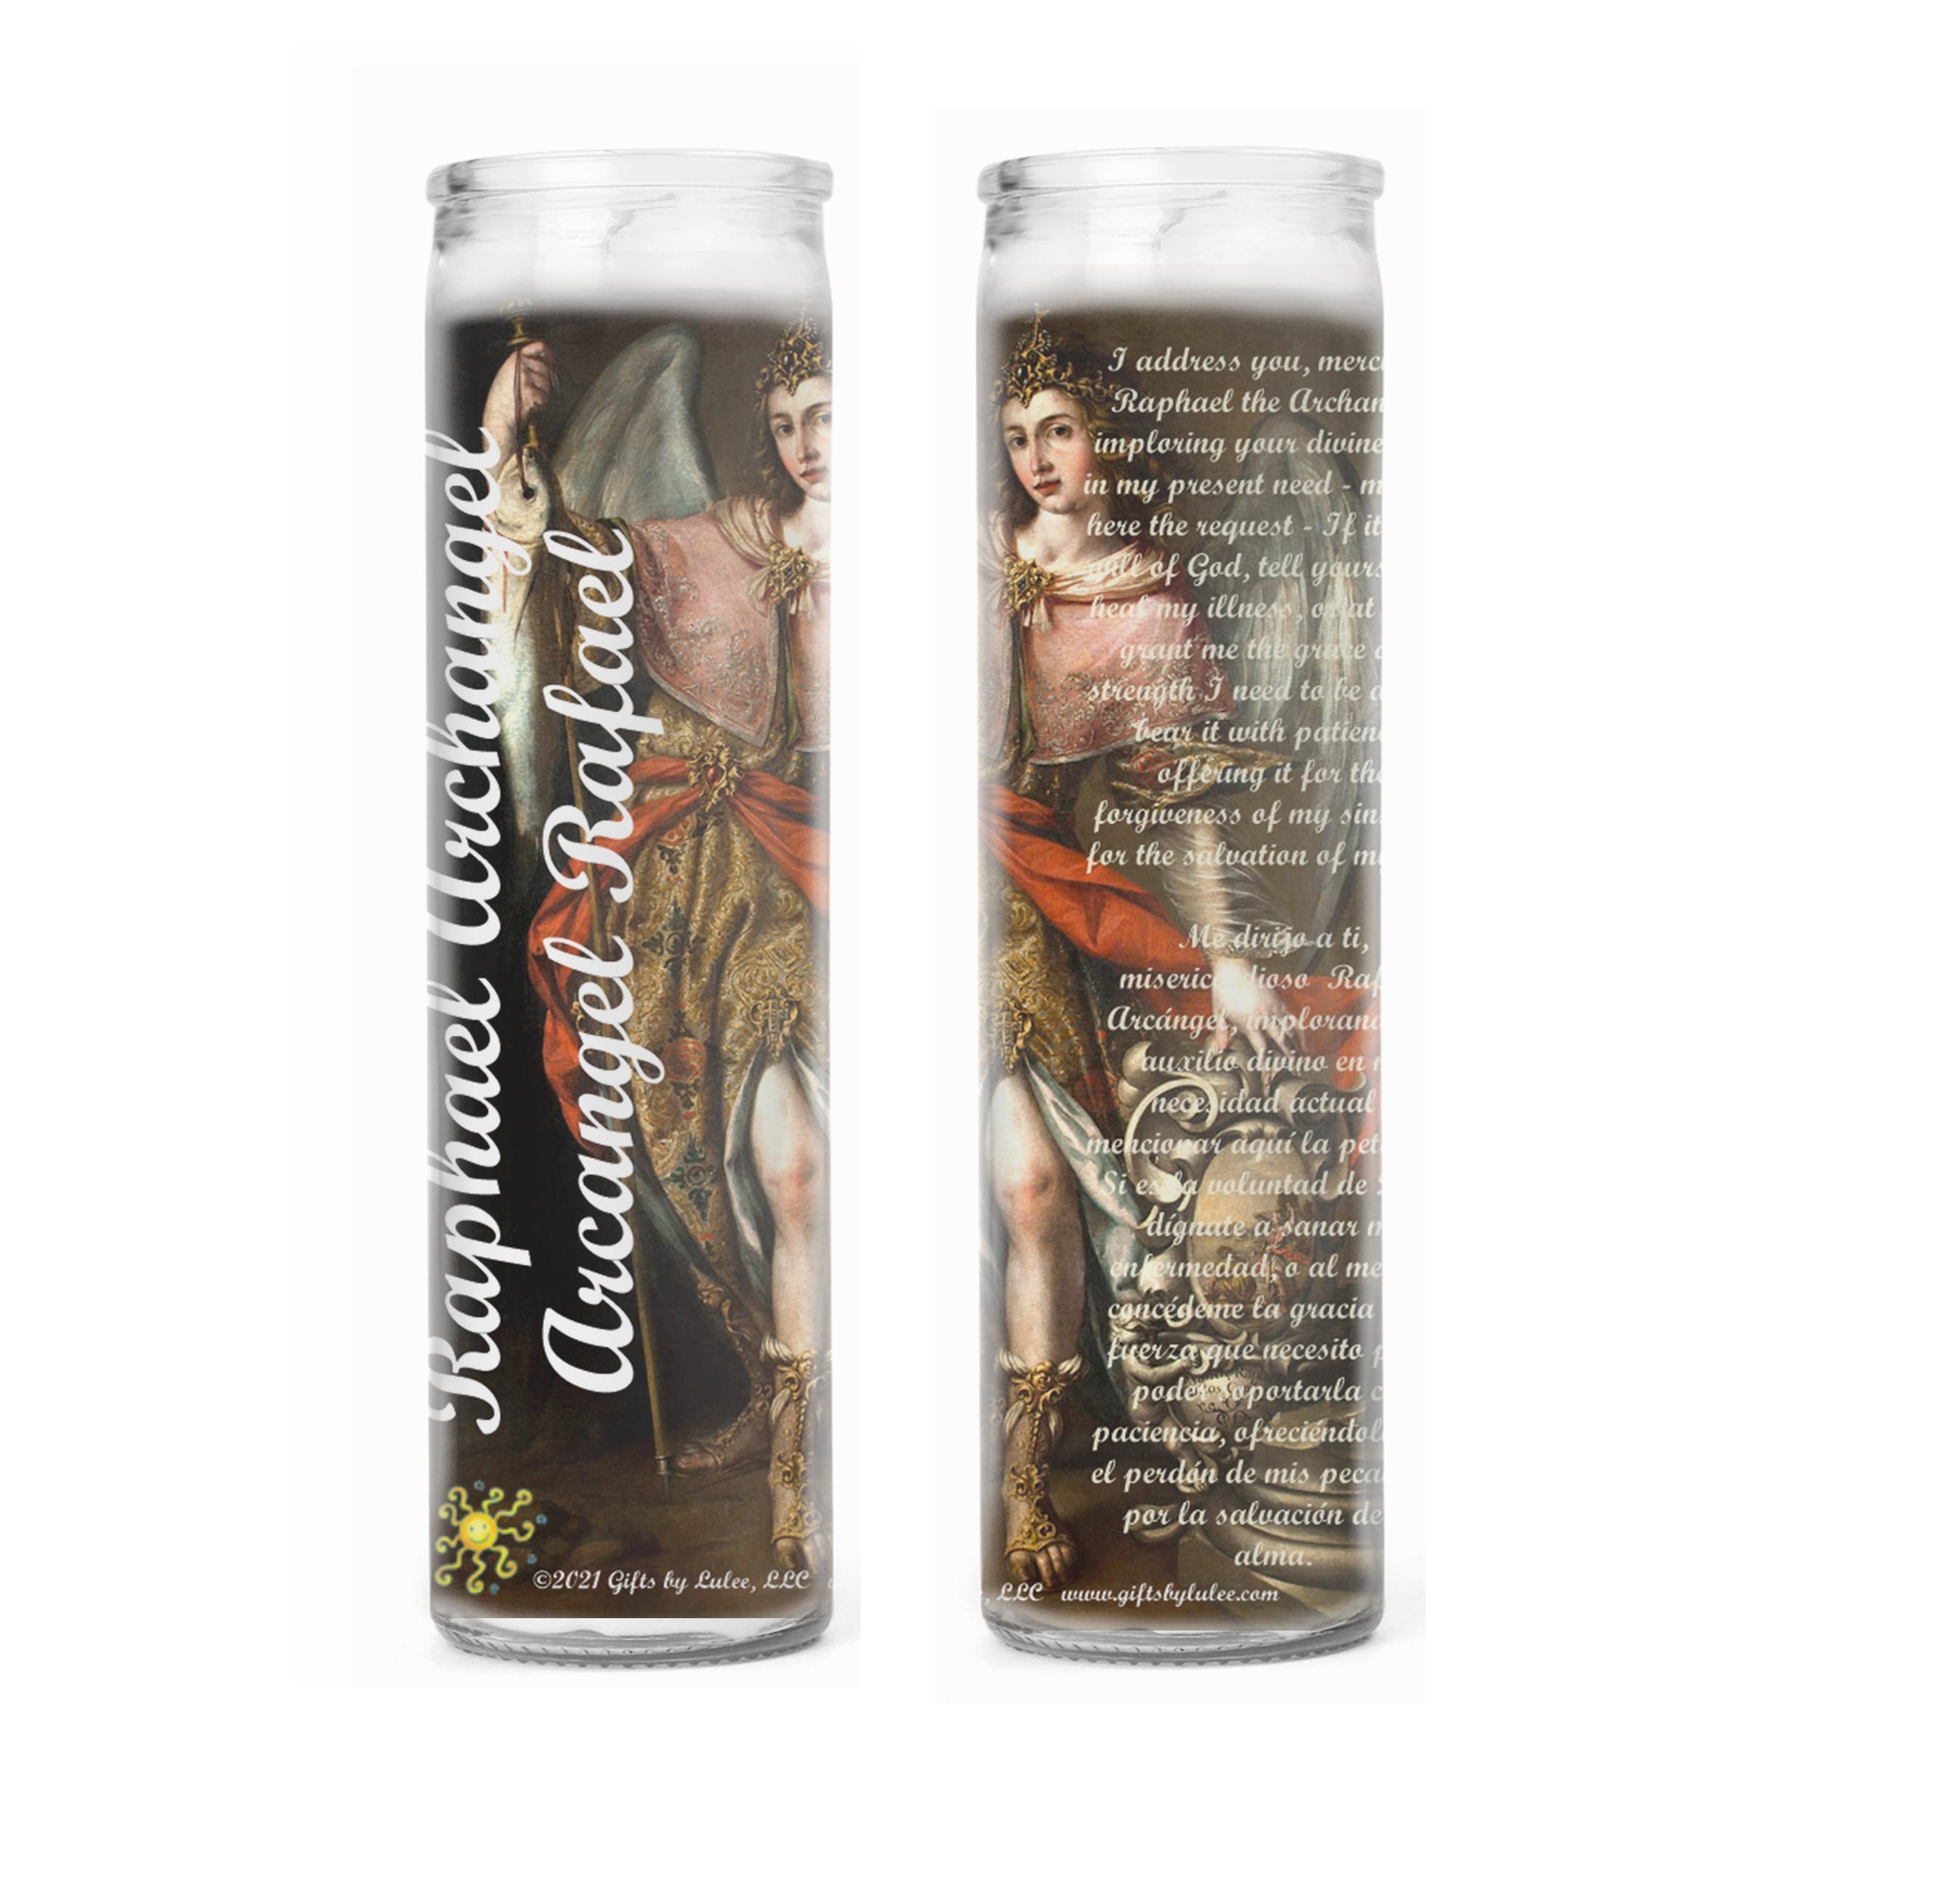 Archangel Raphael The Healer Set of 2 or 4 Candles and Laminated Prayer Card 